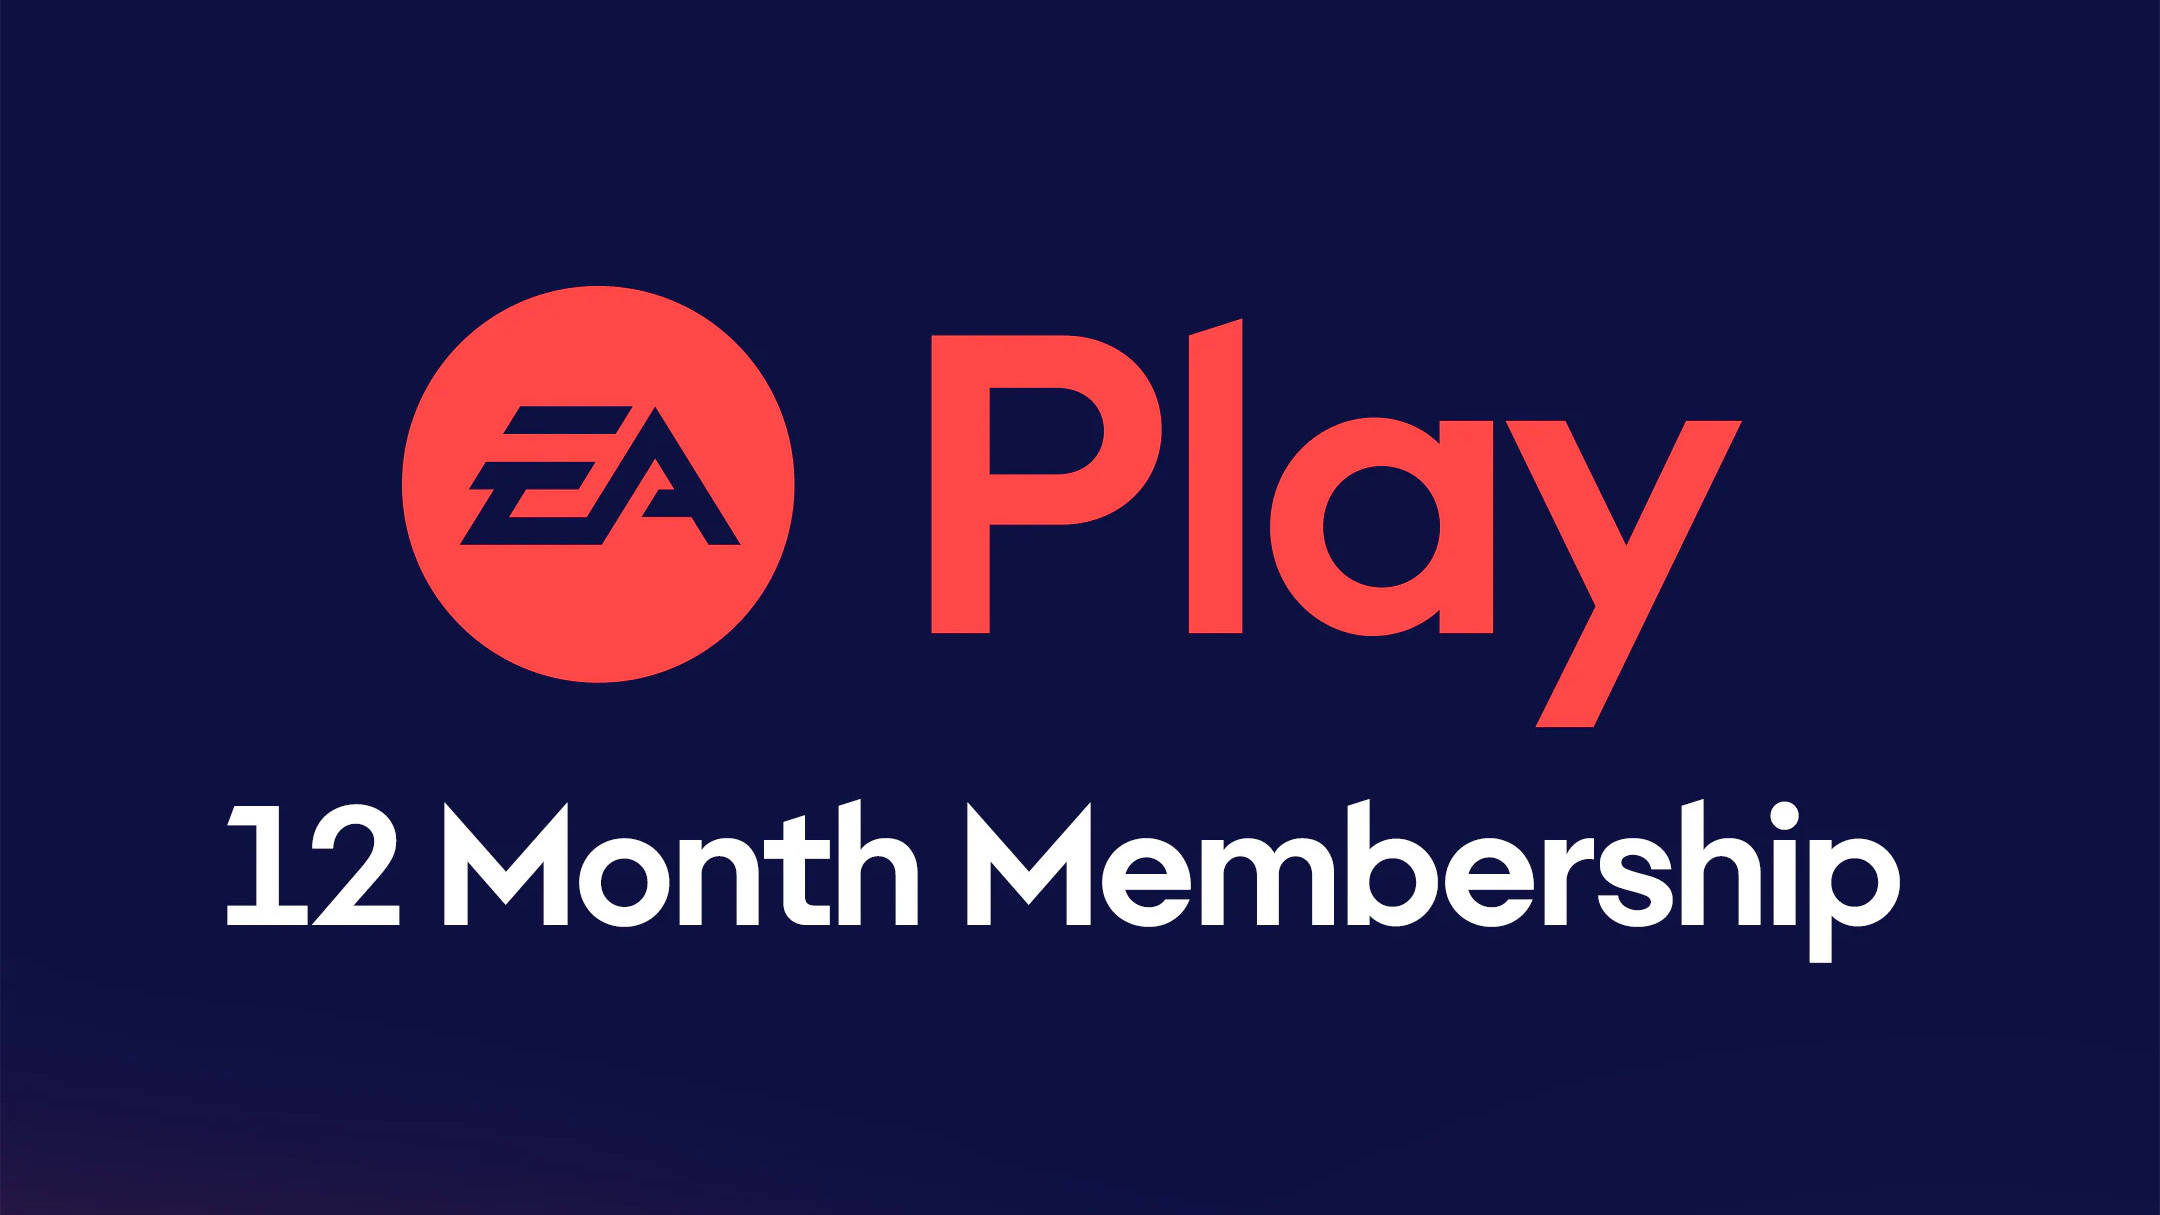 EA Play - 12 Months Subscription PlayStation 4/5 ACCOUNT, 22.53$